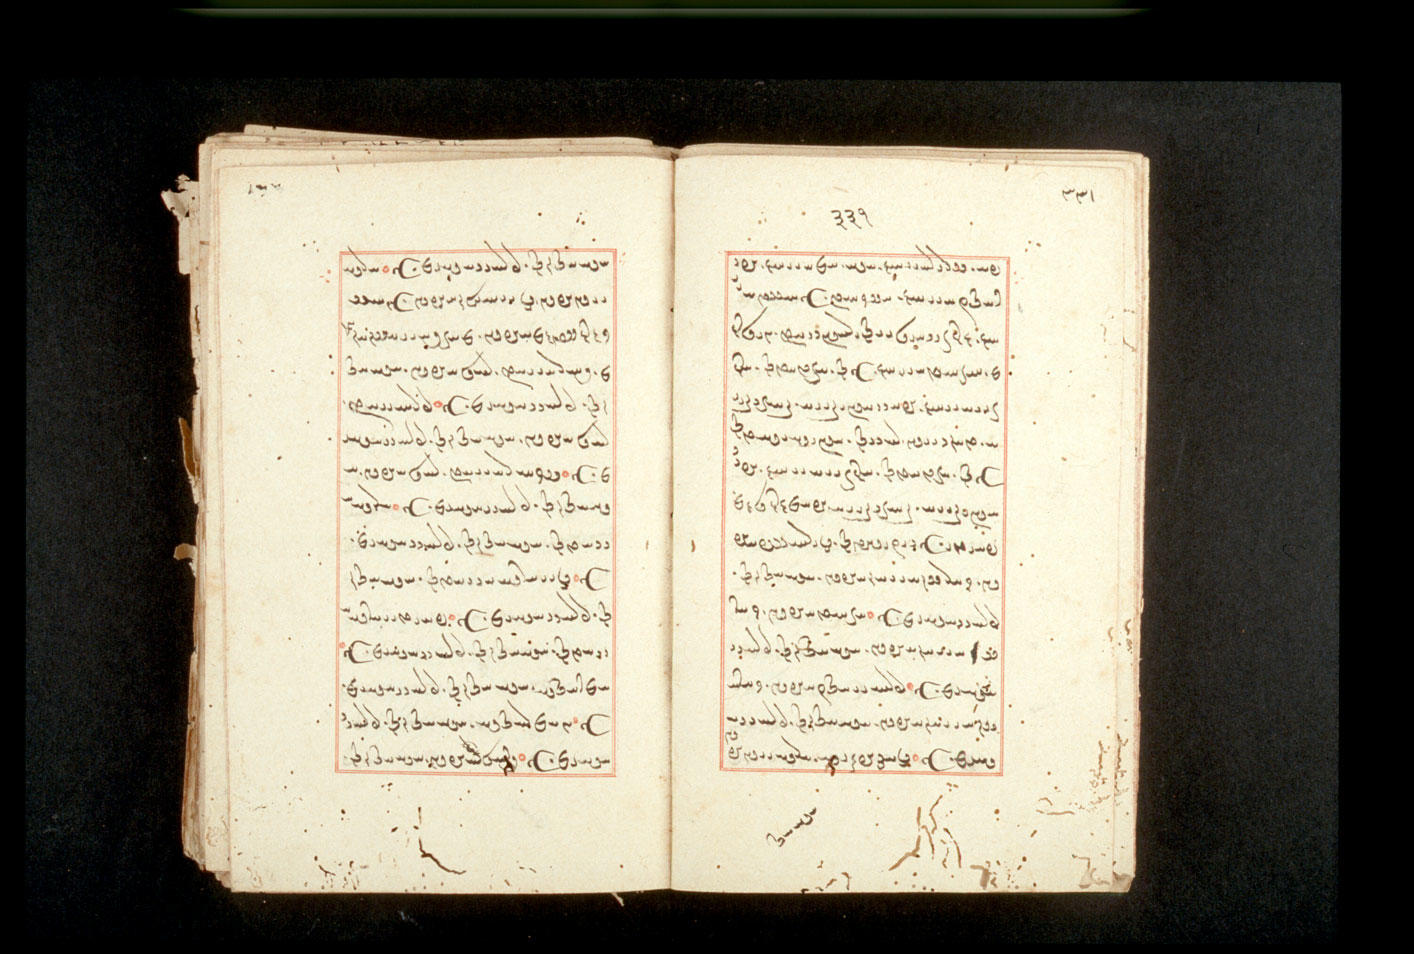 Folios 331v (right) and 332r (left)